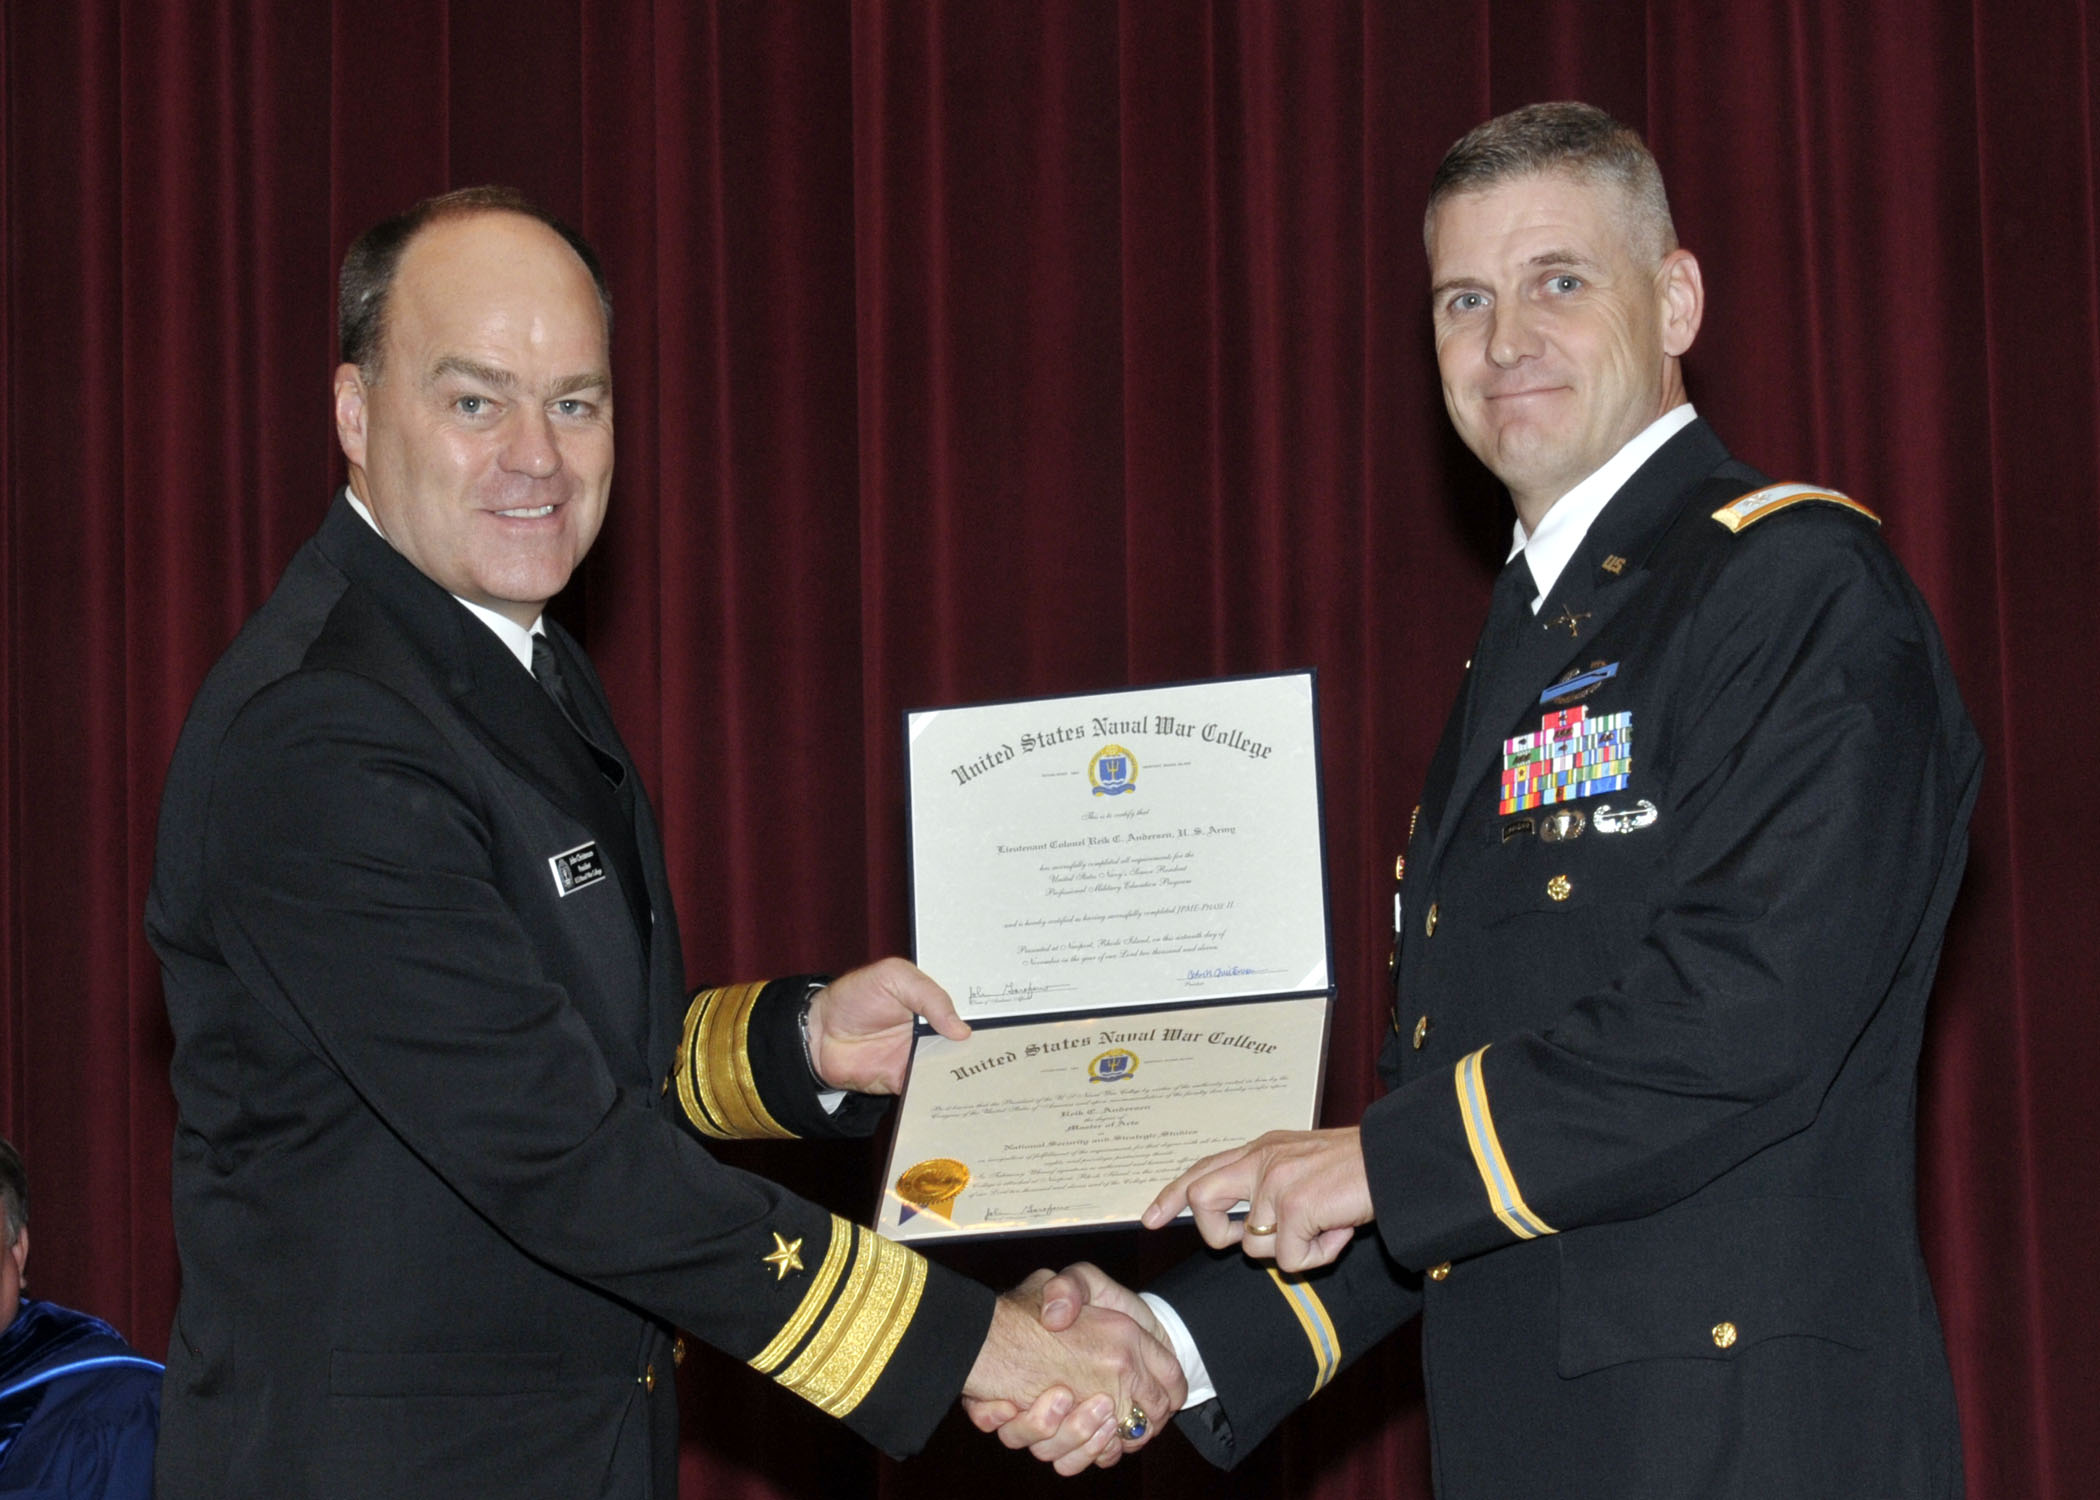 two men in military uniforms shaking hands while one man wearing uniform is holding a certificate